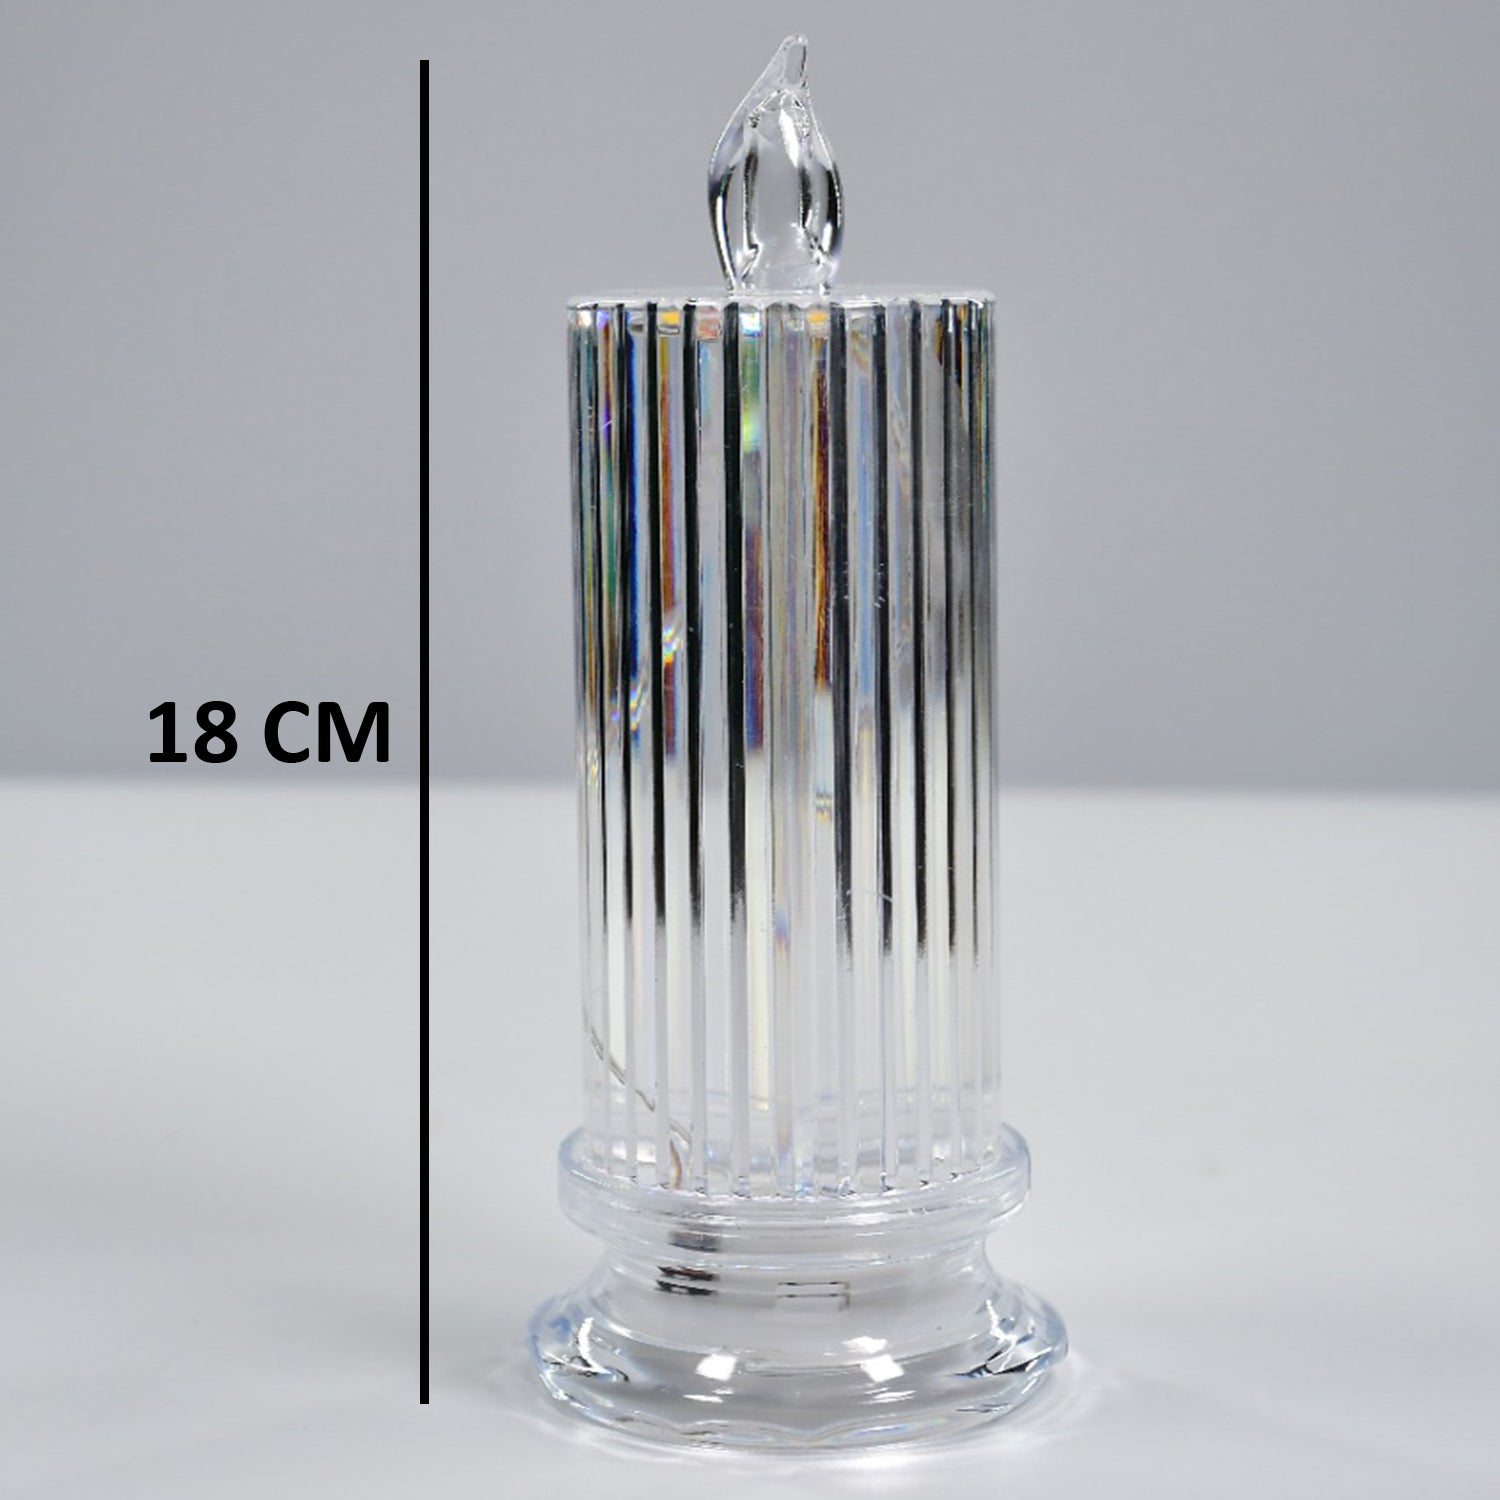 6240A Simple Candles for Home Decoration, Crystal Candle Lights DeoDap